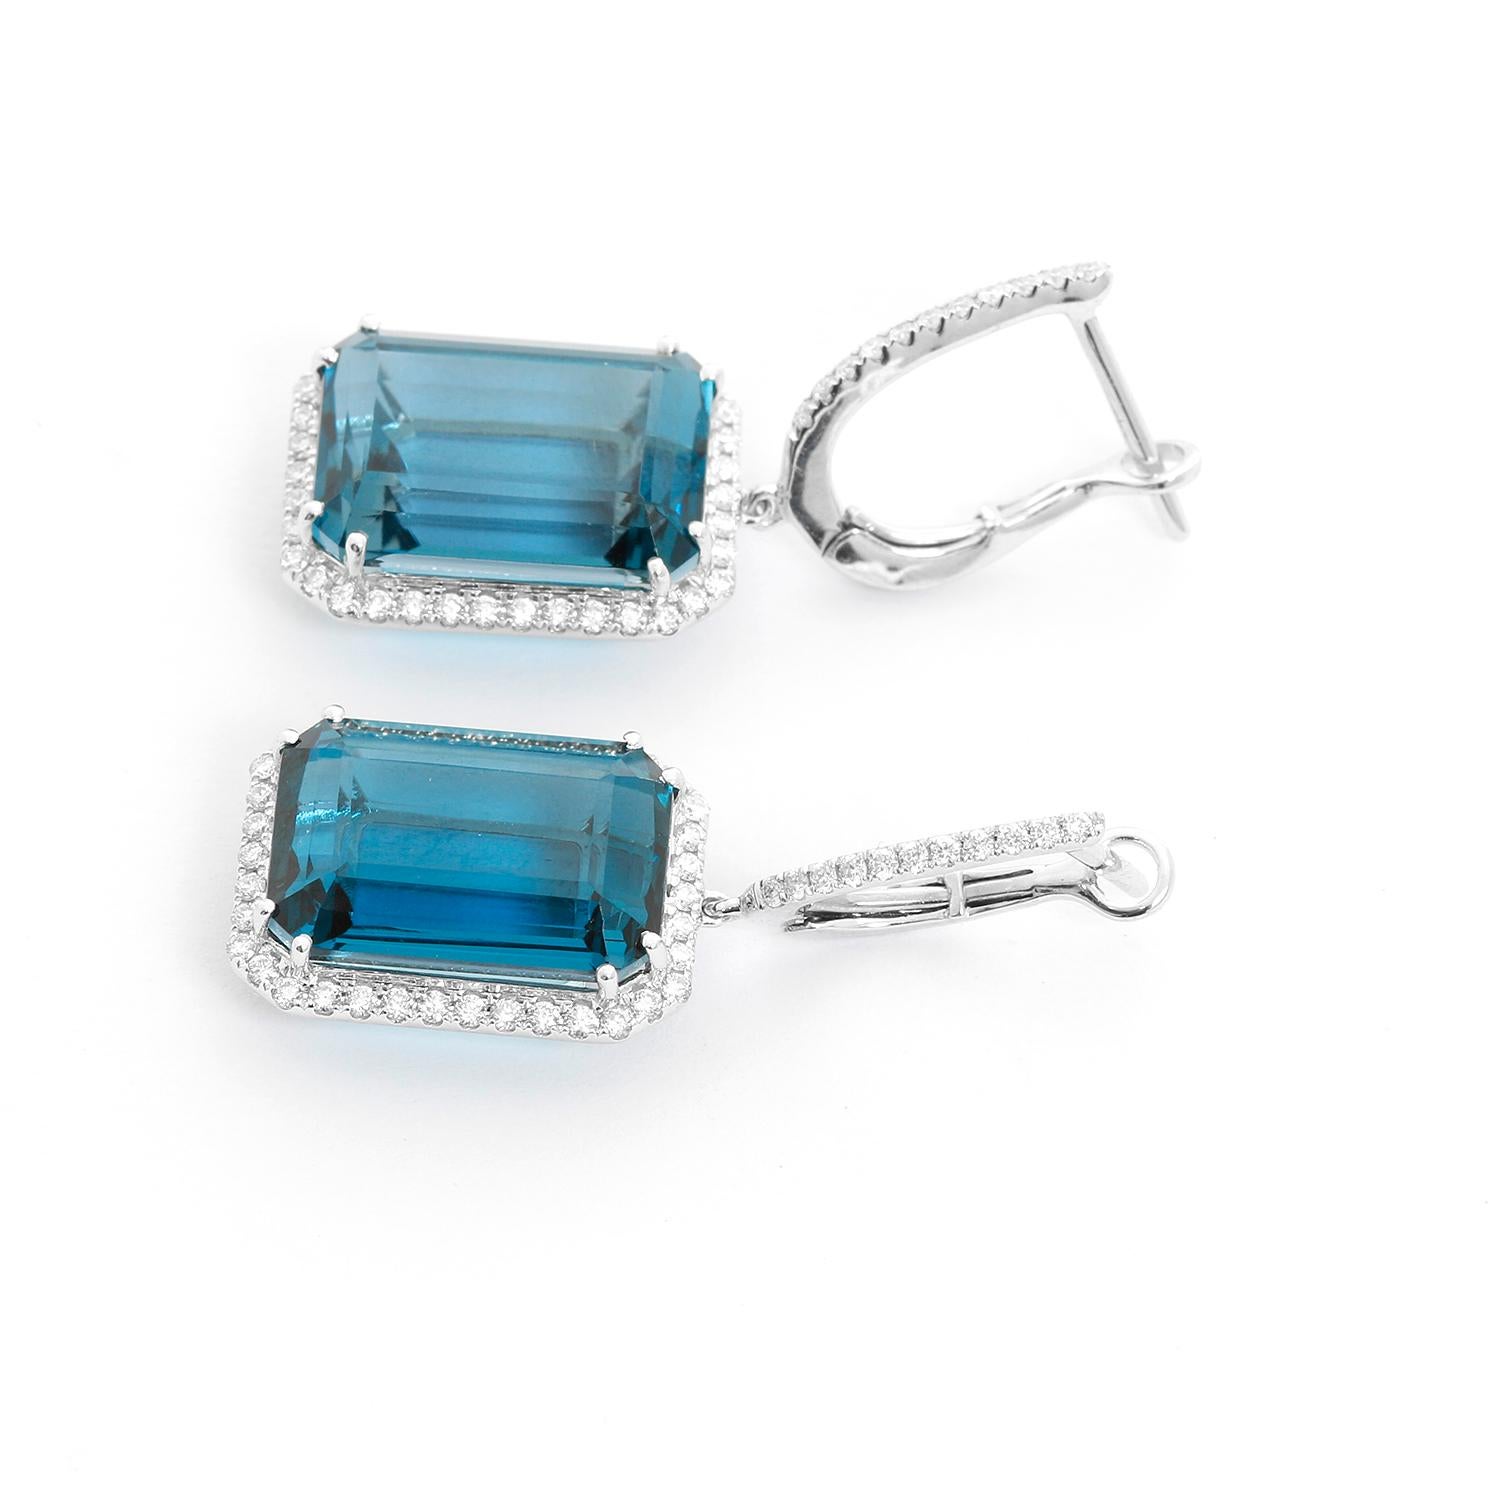 18K White Gold London Blue Topaz &  Diamond Earrings - 18K White Gold dangling earrings featuring an Emerald cut London Blue Topaz, weighing 21.49 cts. Surrounded by diamonds weighing .60cts.  Total measure 1/2 x  3/4 inches. Total weight 9 grams.